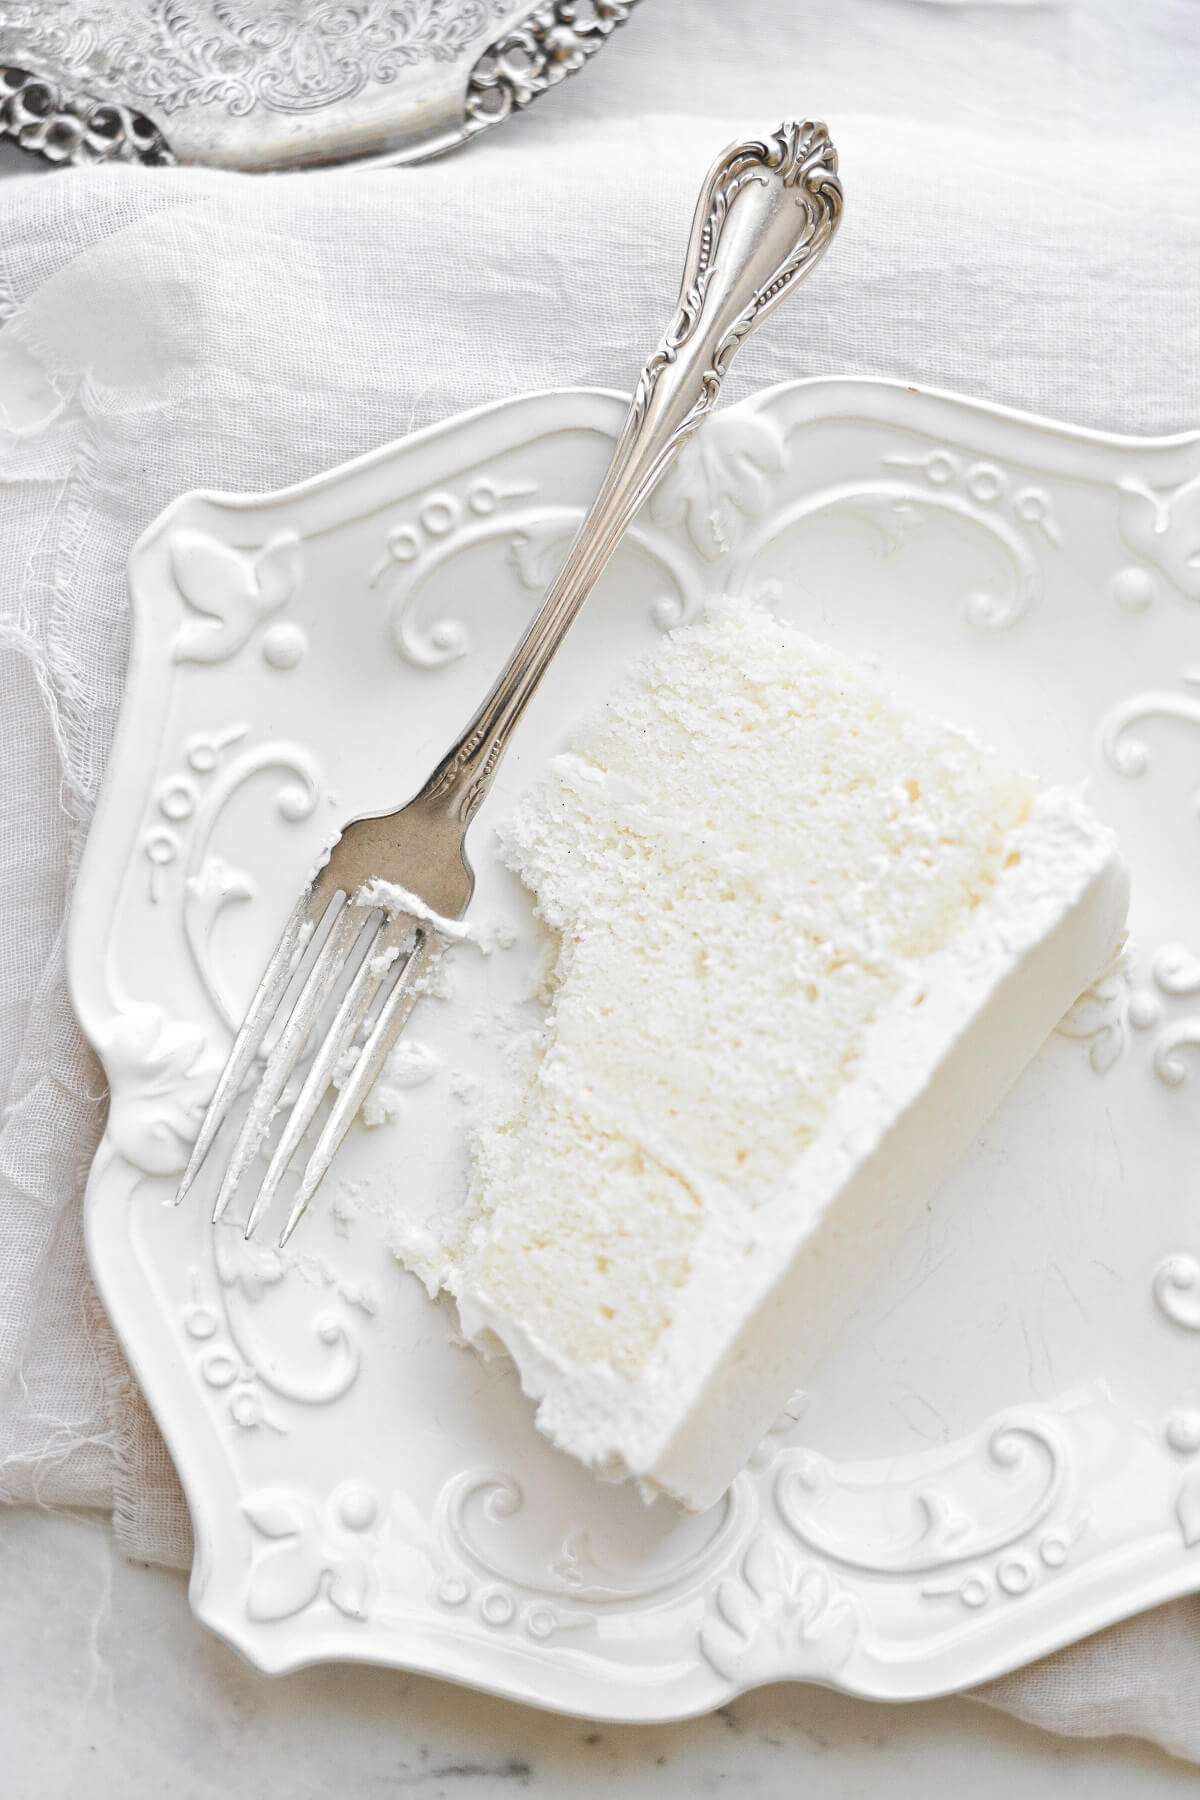 A slice of white velvet cake with a bite taken out of it, on a white plate, with a silver fork..